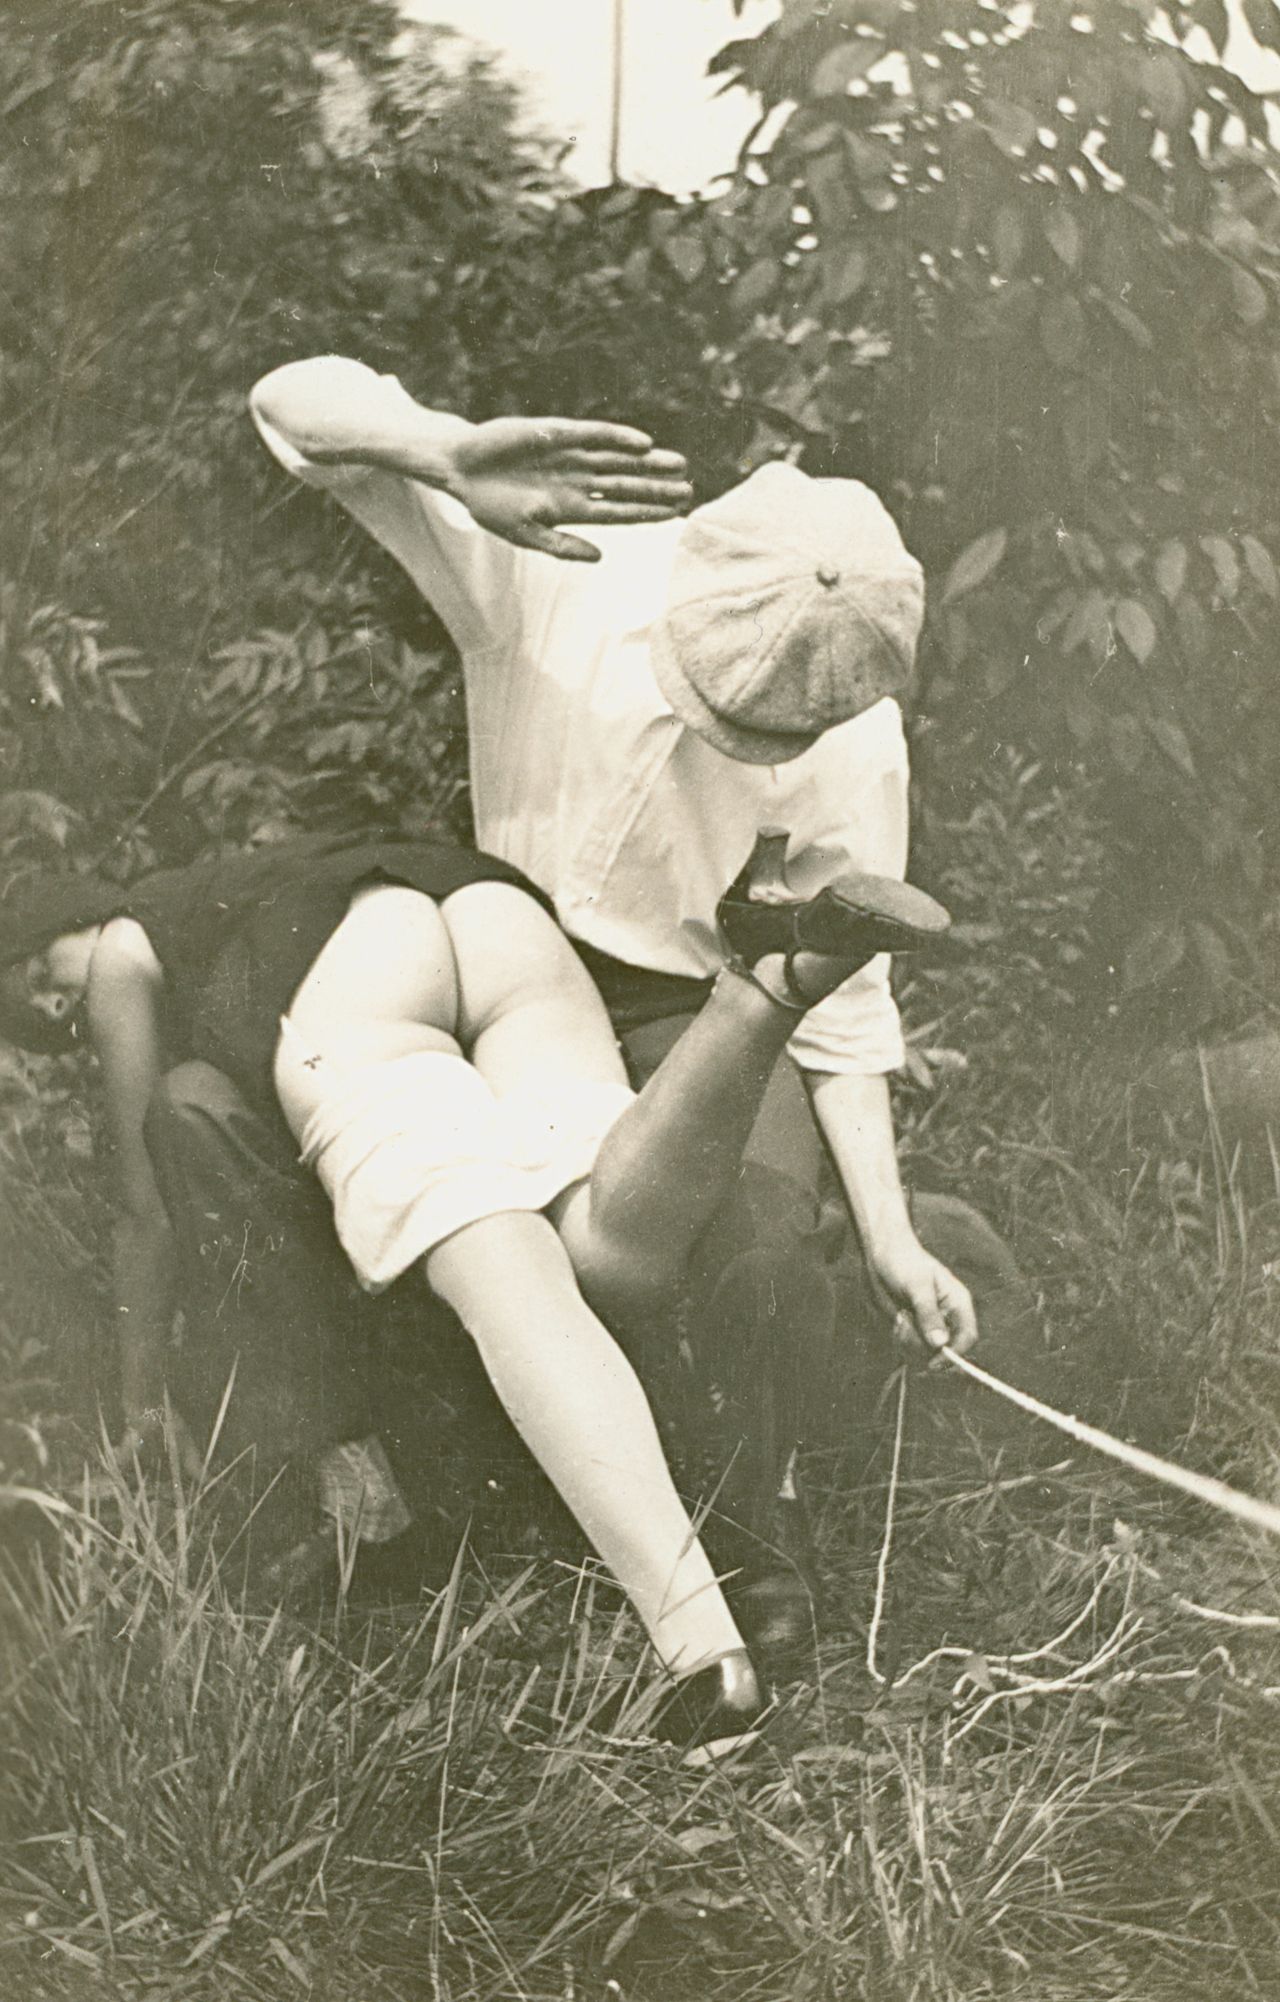 Untitled Self-Portrait of Outdoor Spanking Couple. Collection of Mark Rotenberg.